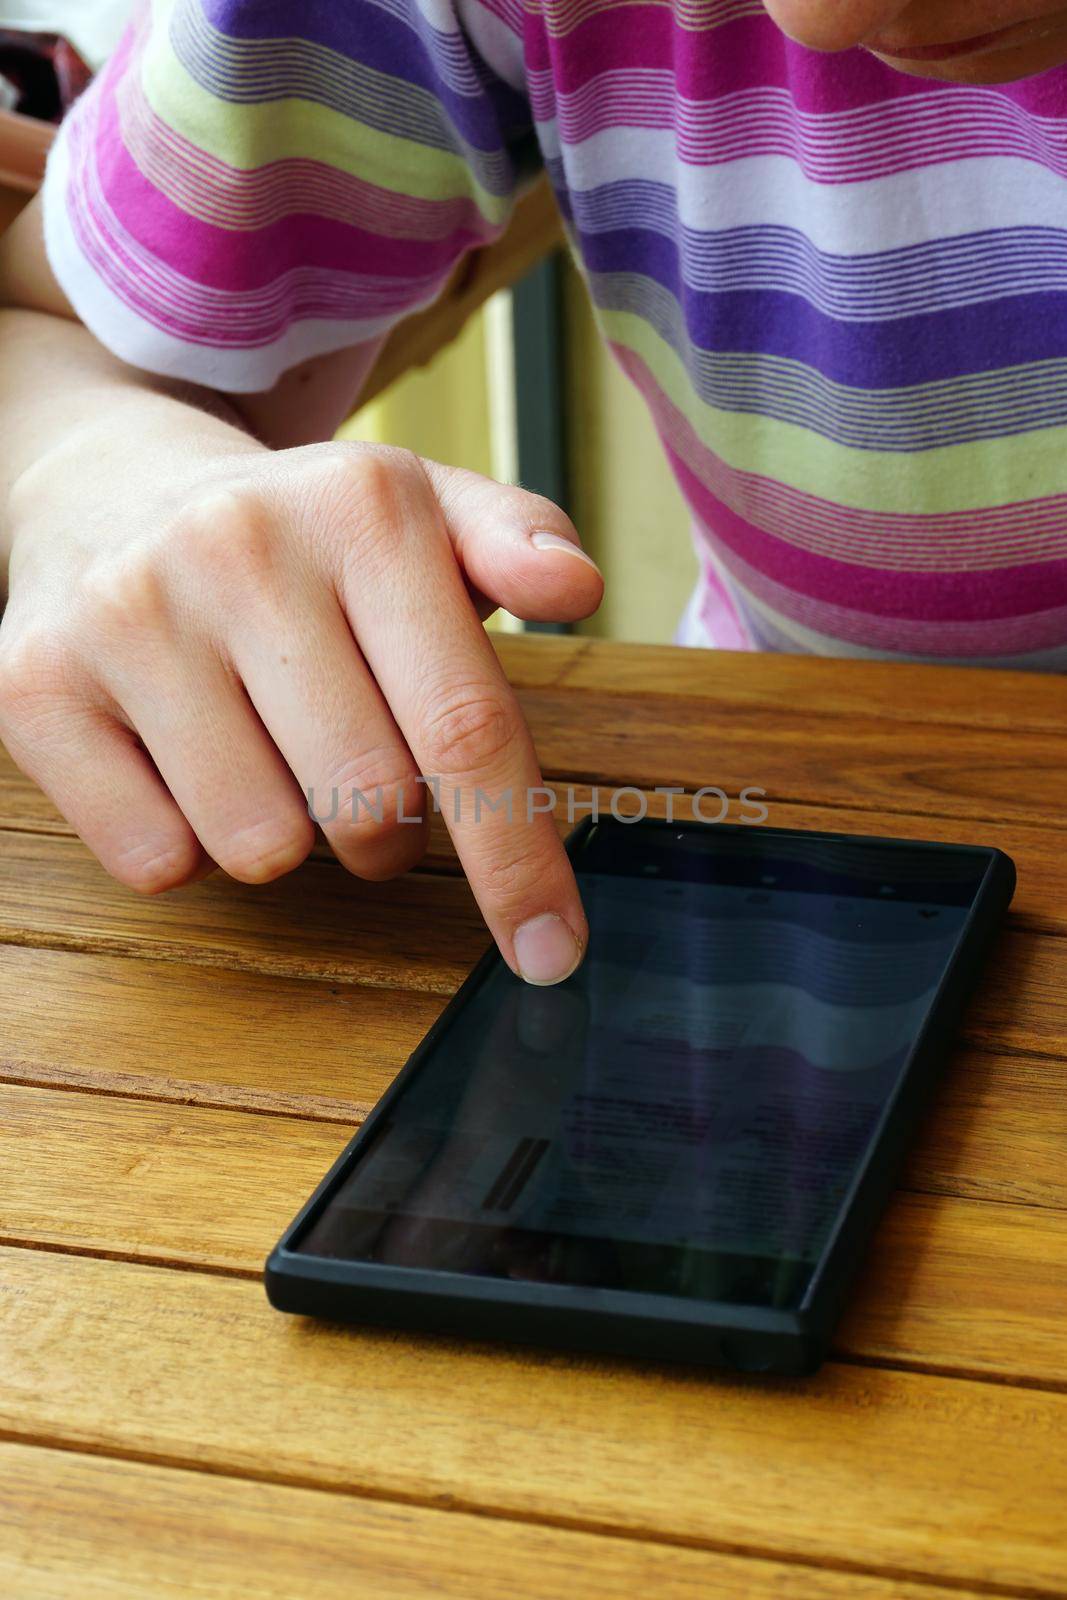 Touching the smartphone screen with finger